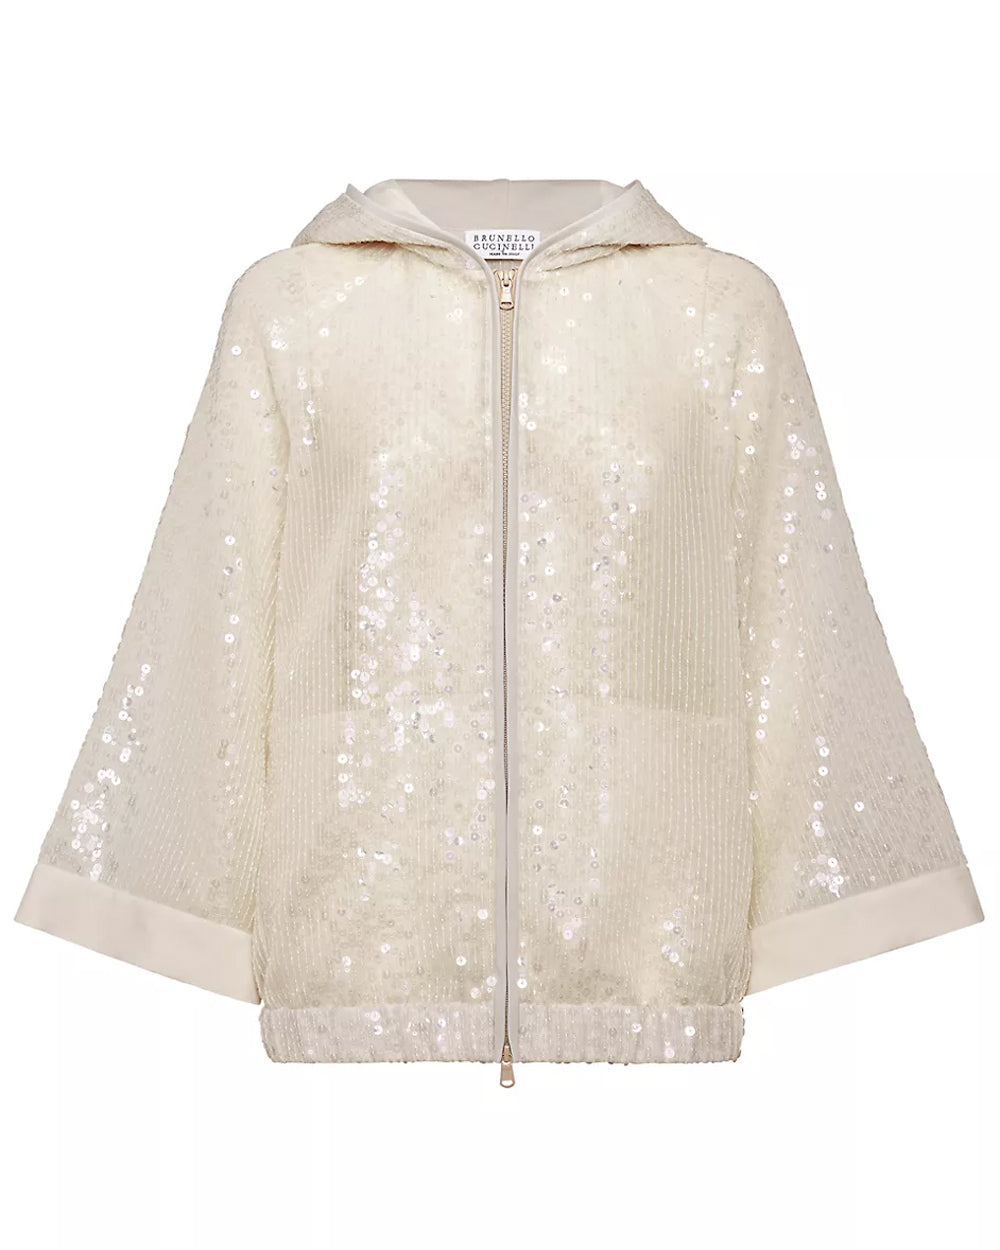 Warm White Sequin Paillette Hooded Jacket